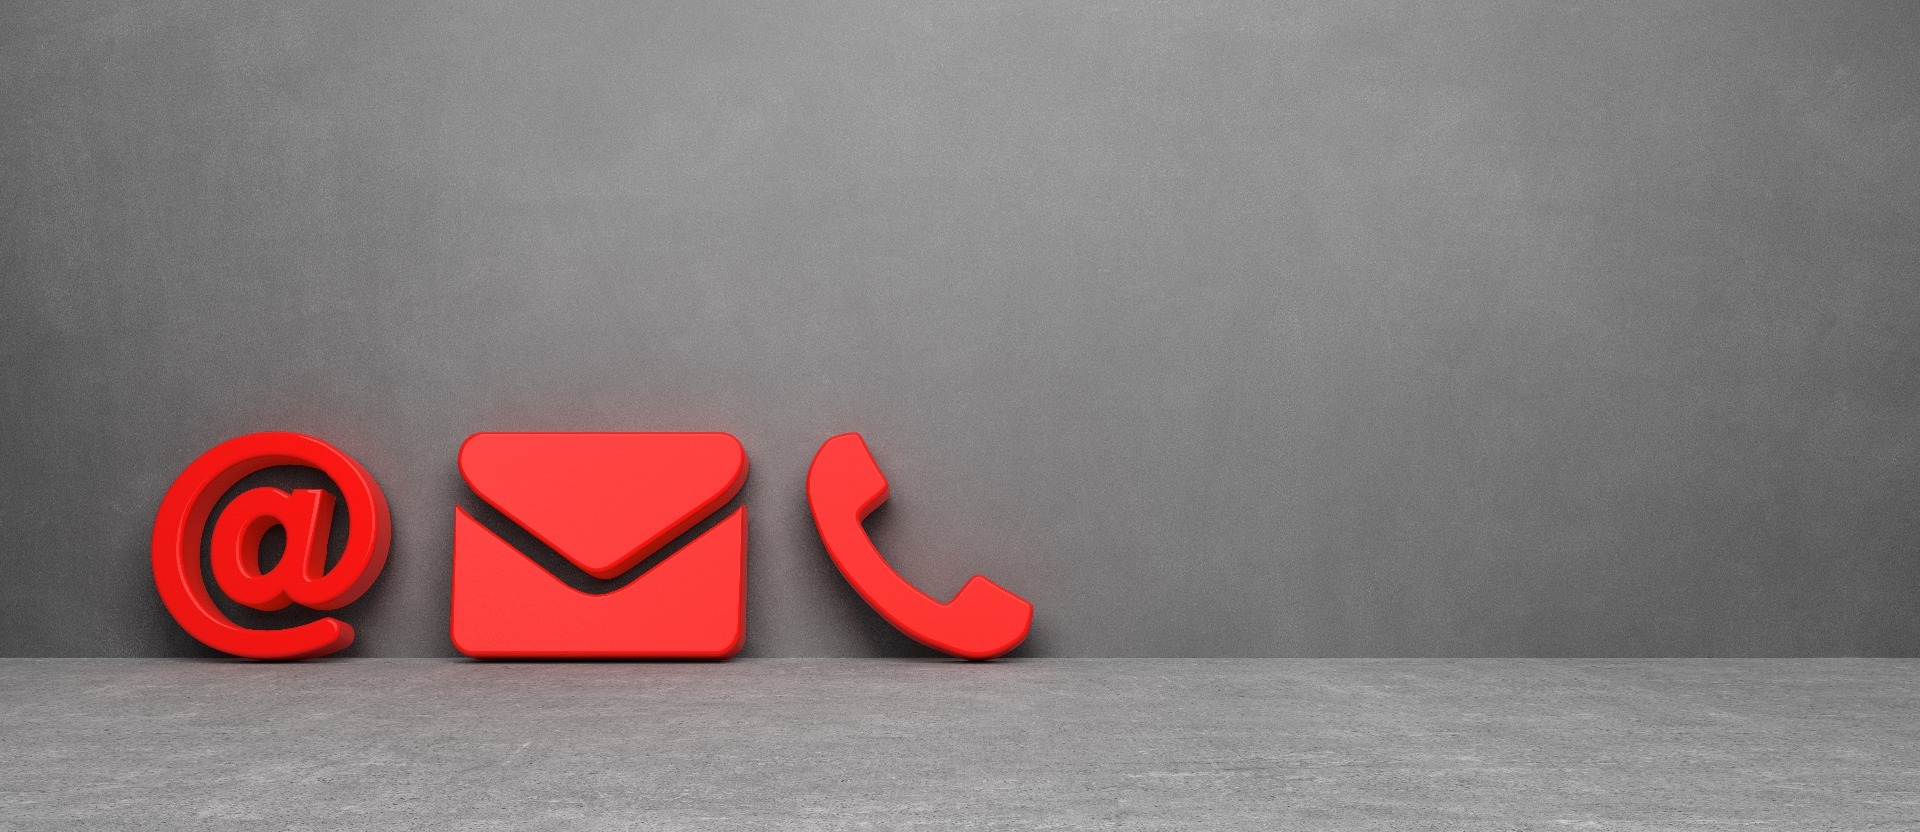 A red '@' sign, an e-mail envelope and a telephone cut-outs against a black background